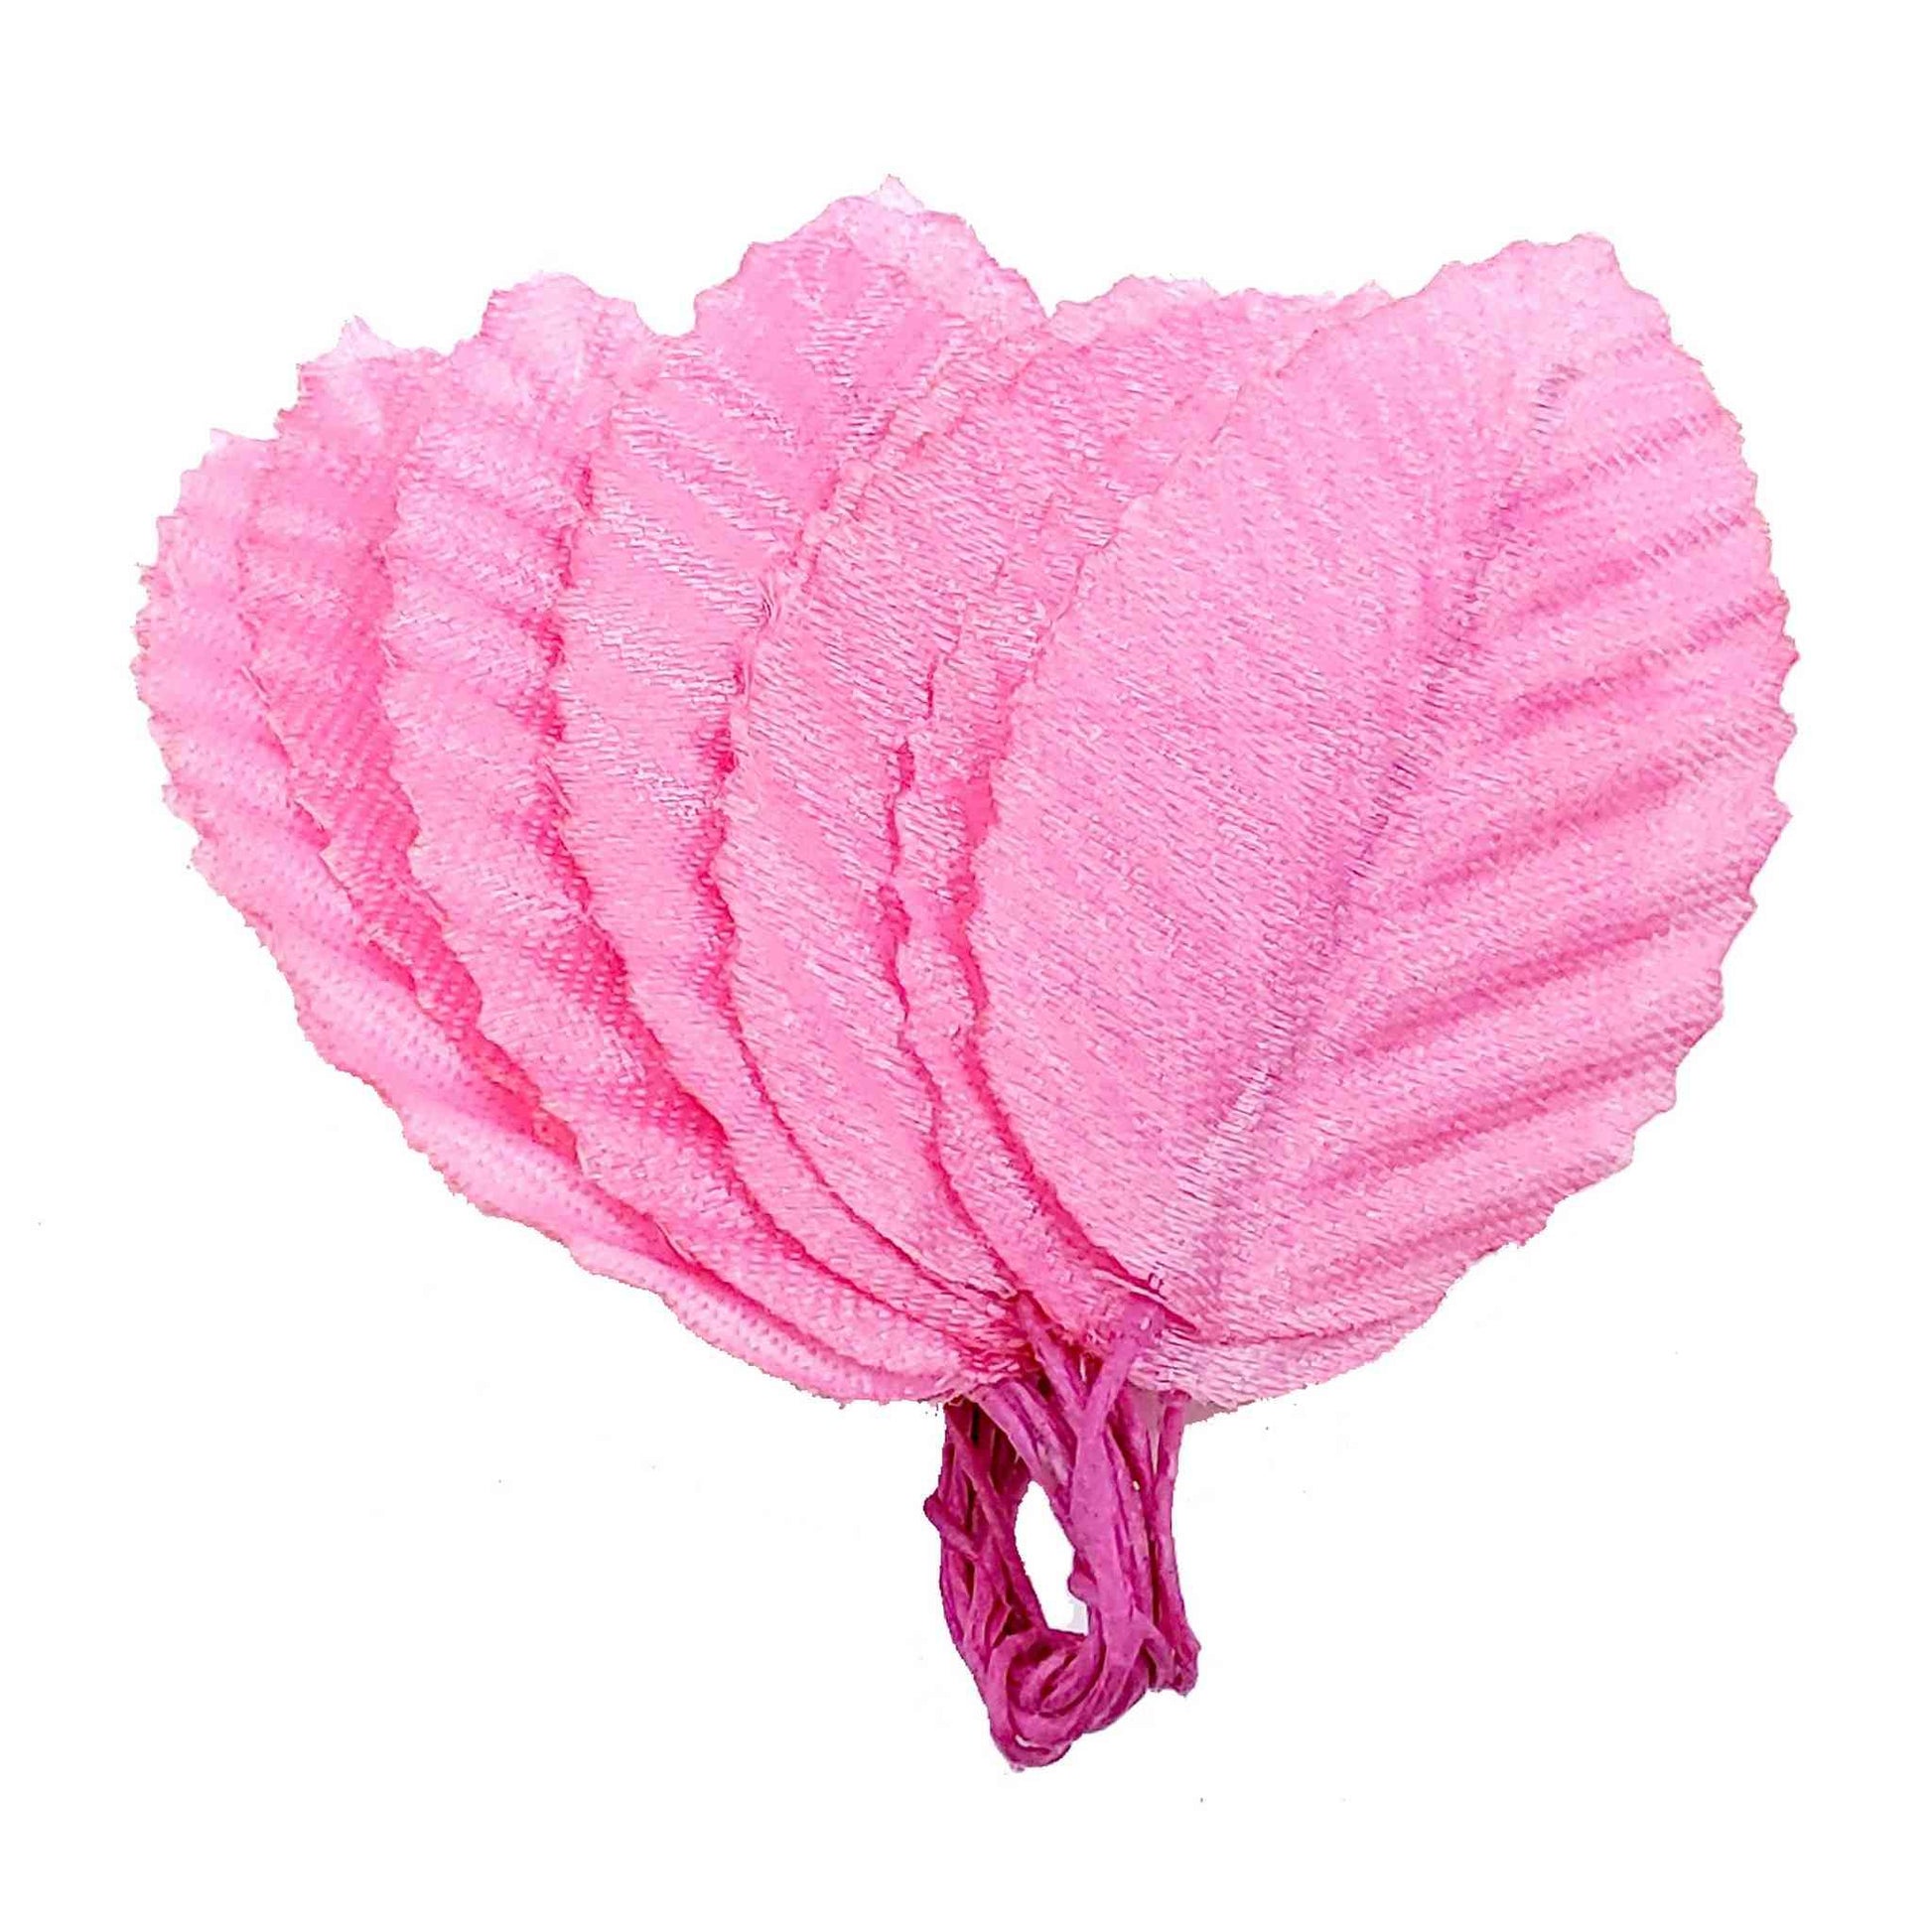 Indian Petals Beautiful Fabric Leaf for DIY Craft, Trouseau Packing or Decoration (Bunch of 12) - Design 60, Hot Pink - Indian Petals